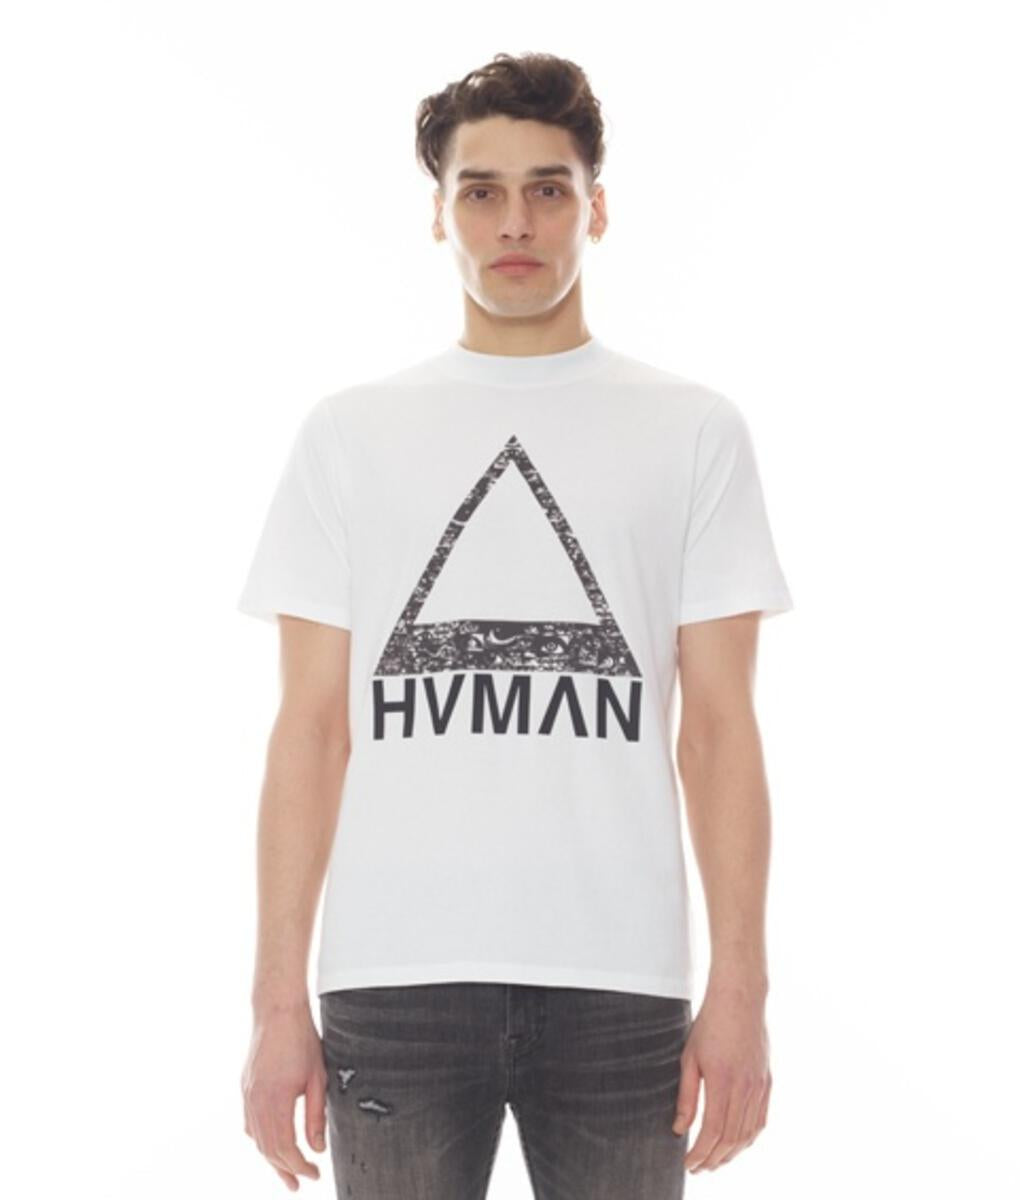 HVMAN BY CULT NOVELTY TEE EYES TRIANGLE TEE (WHITE)